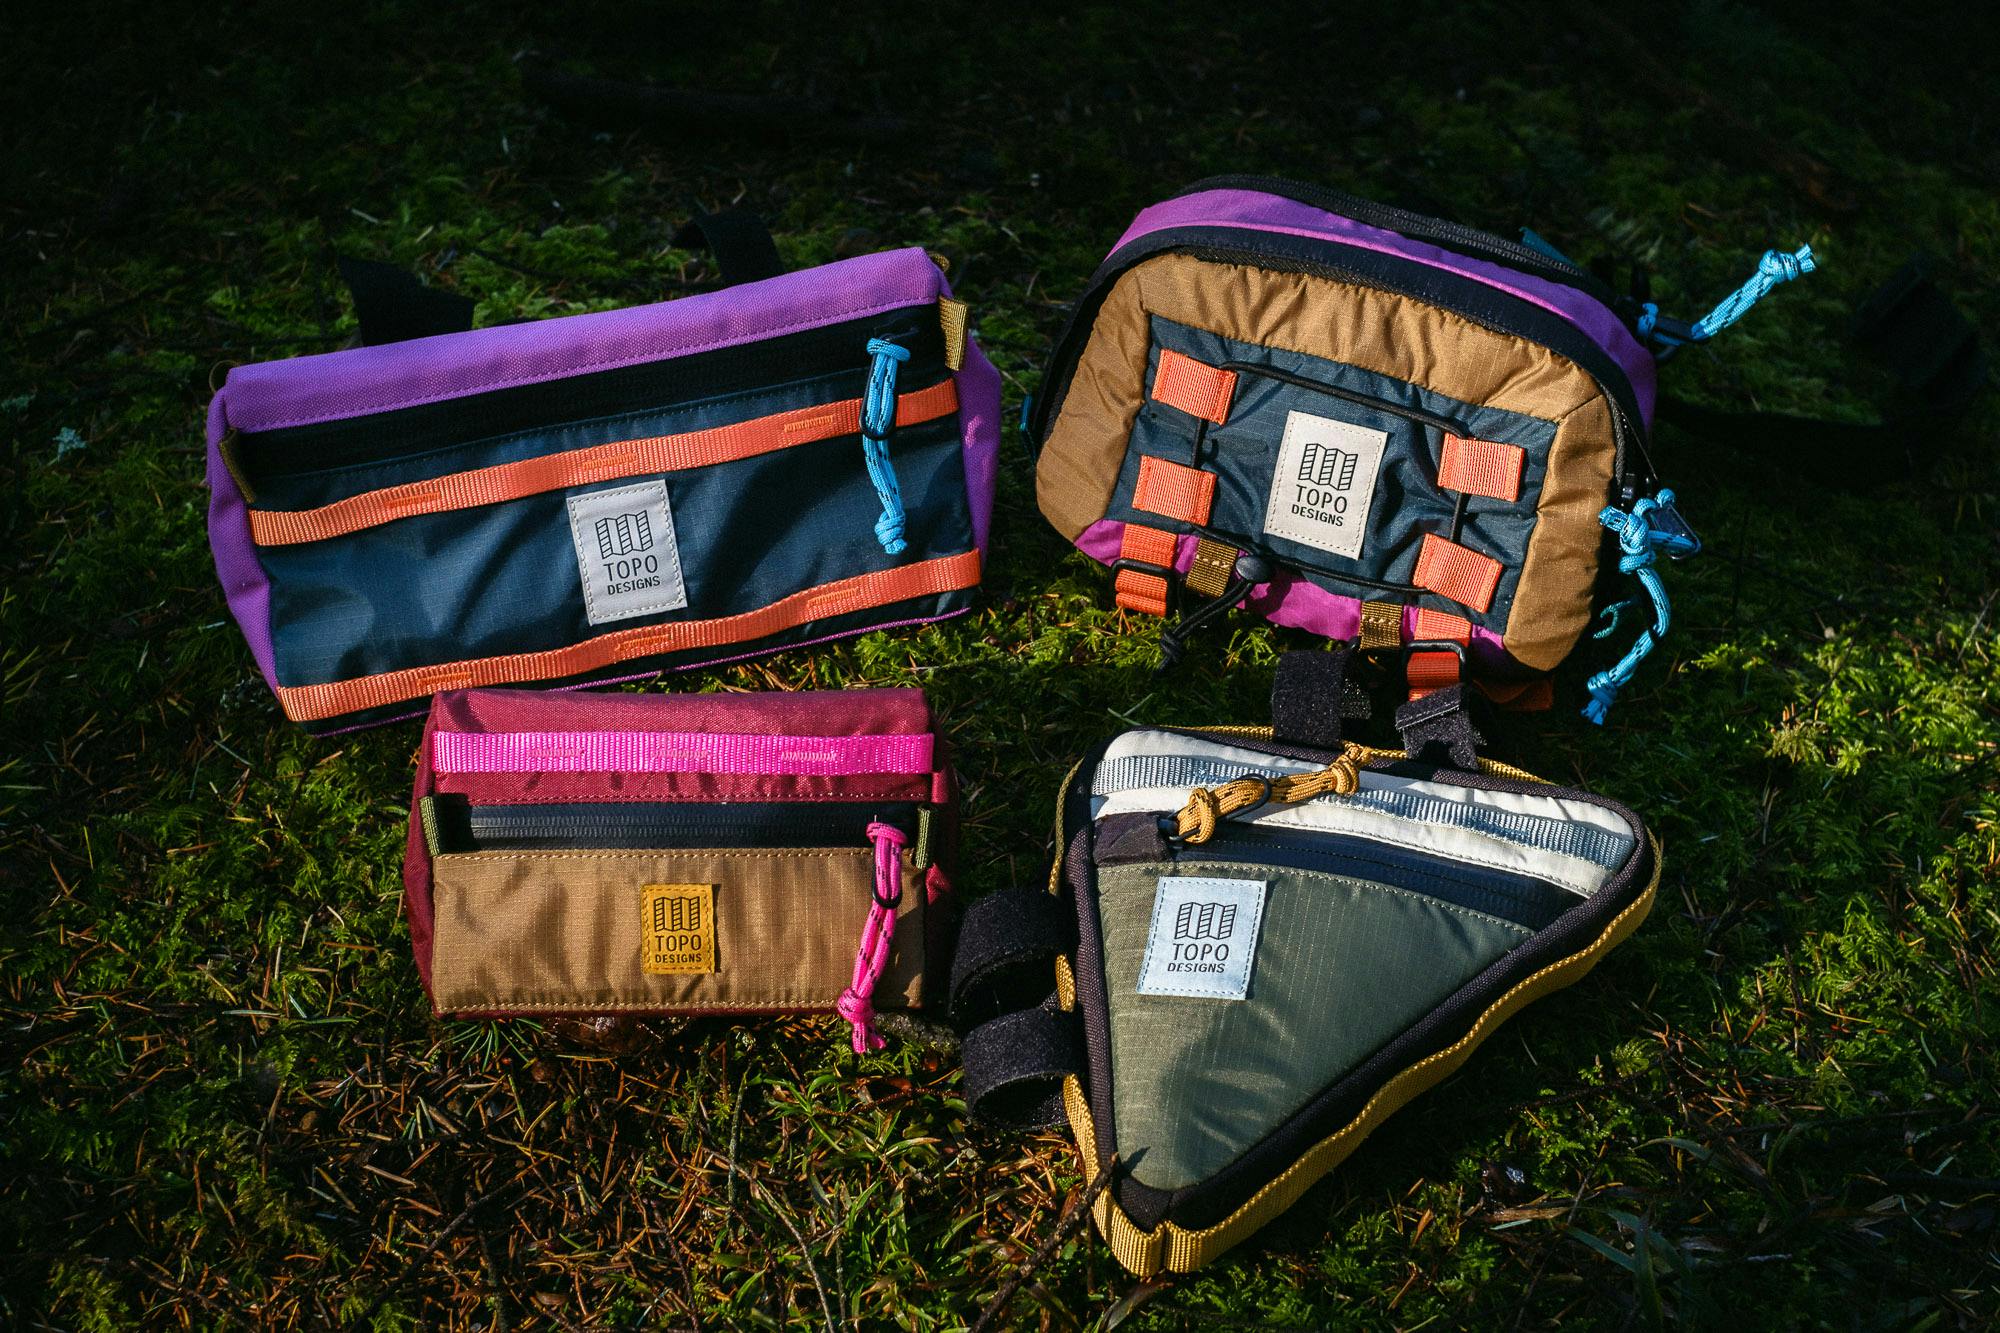 The line up of Topo Designs bike bags.